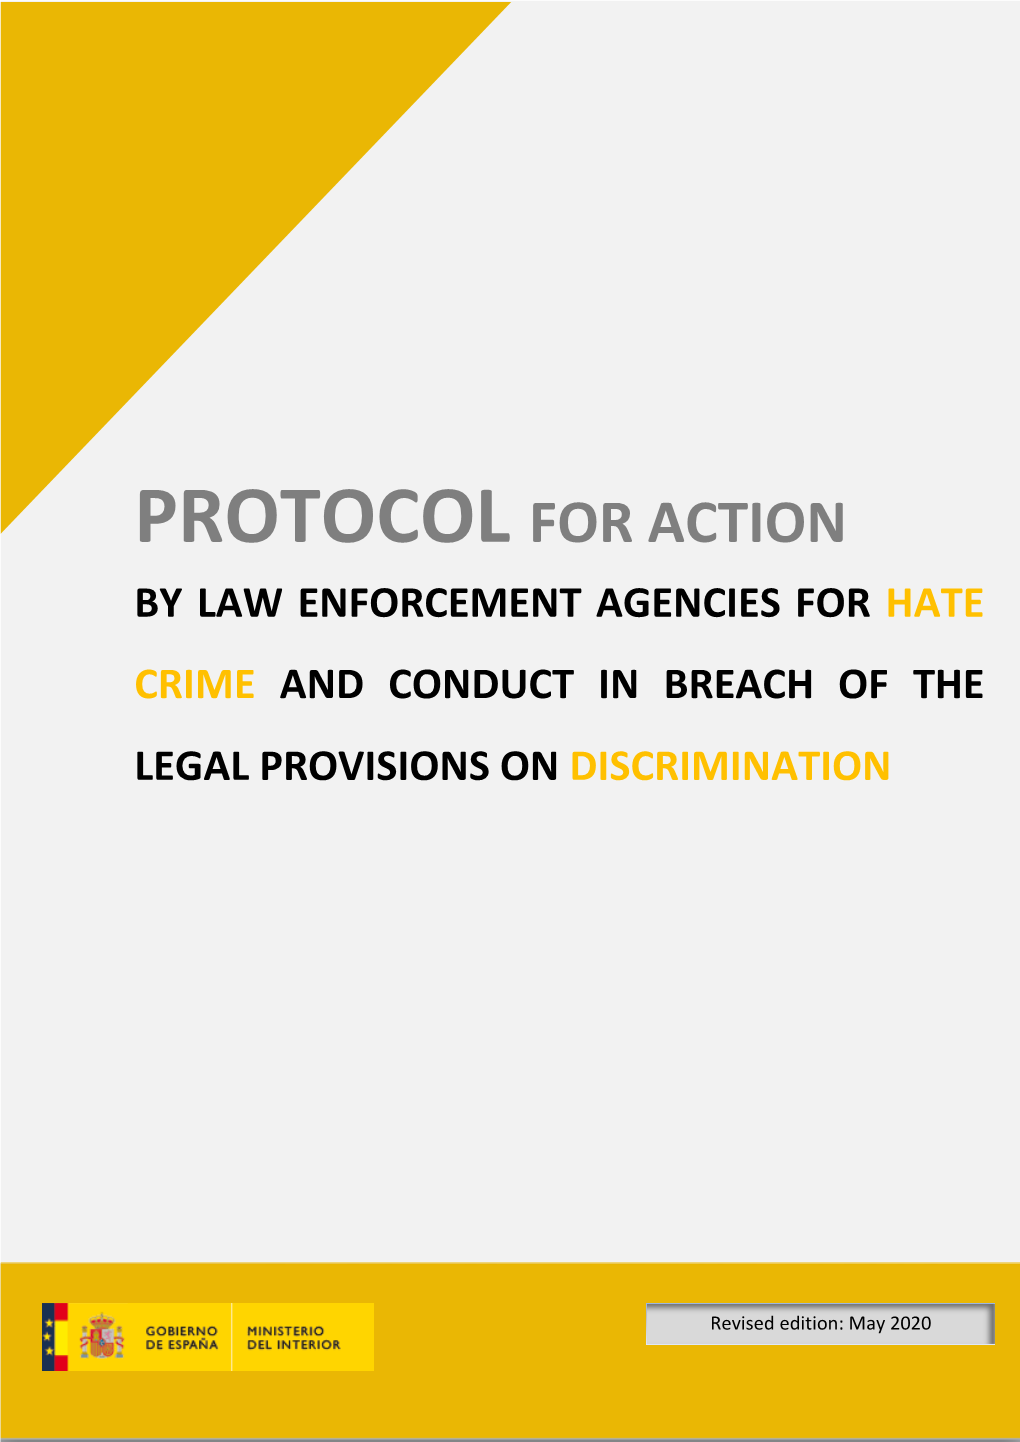 Contents Protocol for Action by Law Enforcement Agencies for Hate